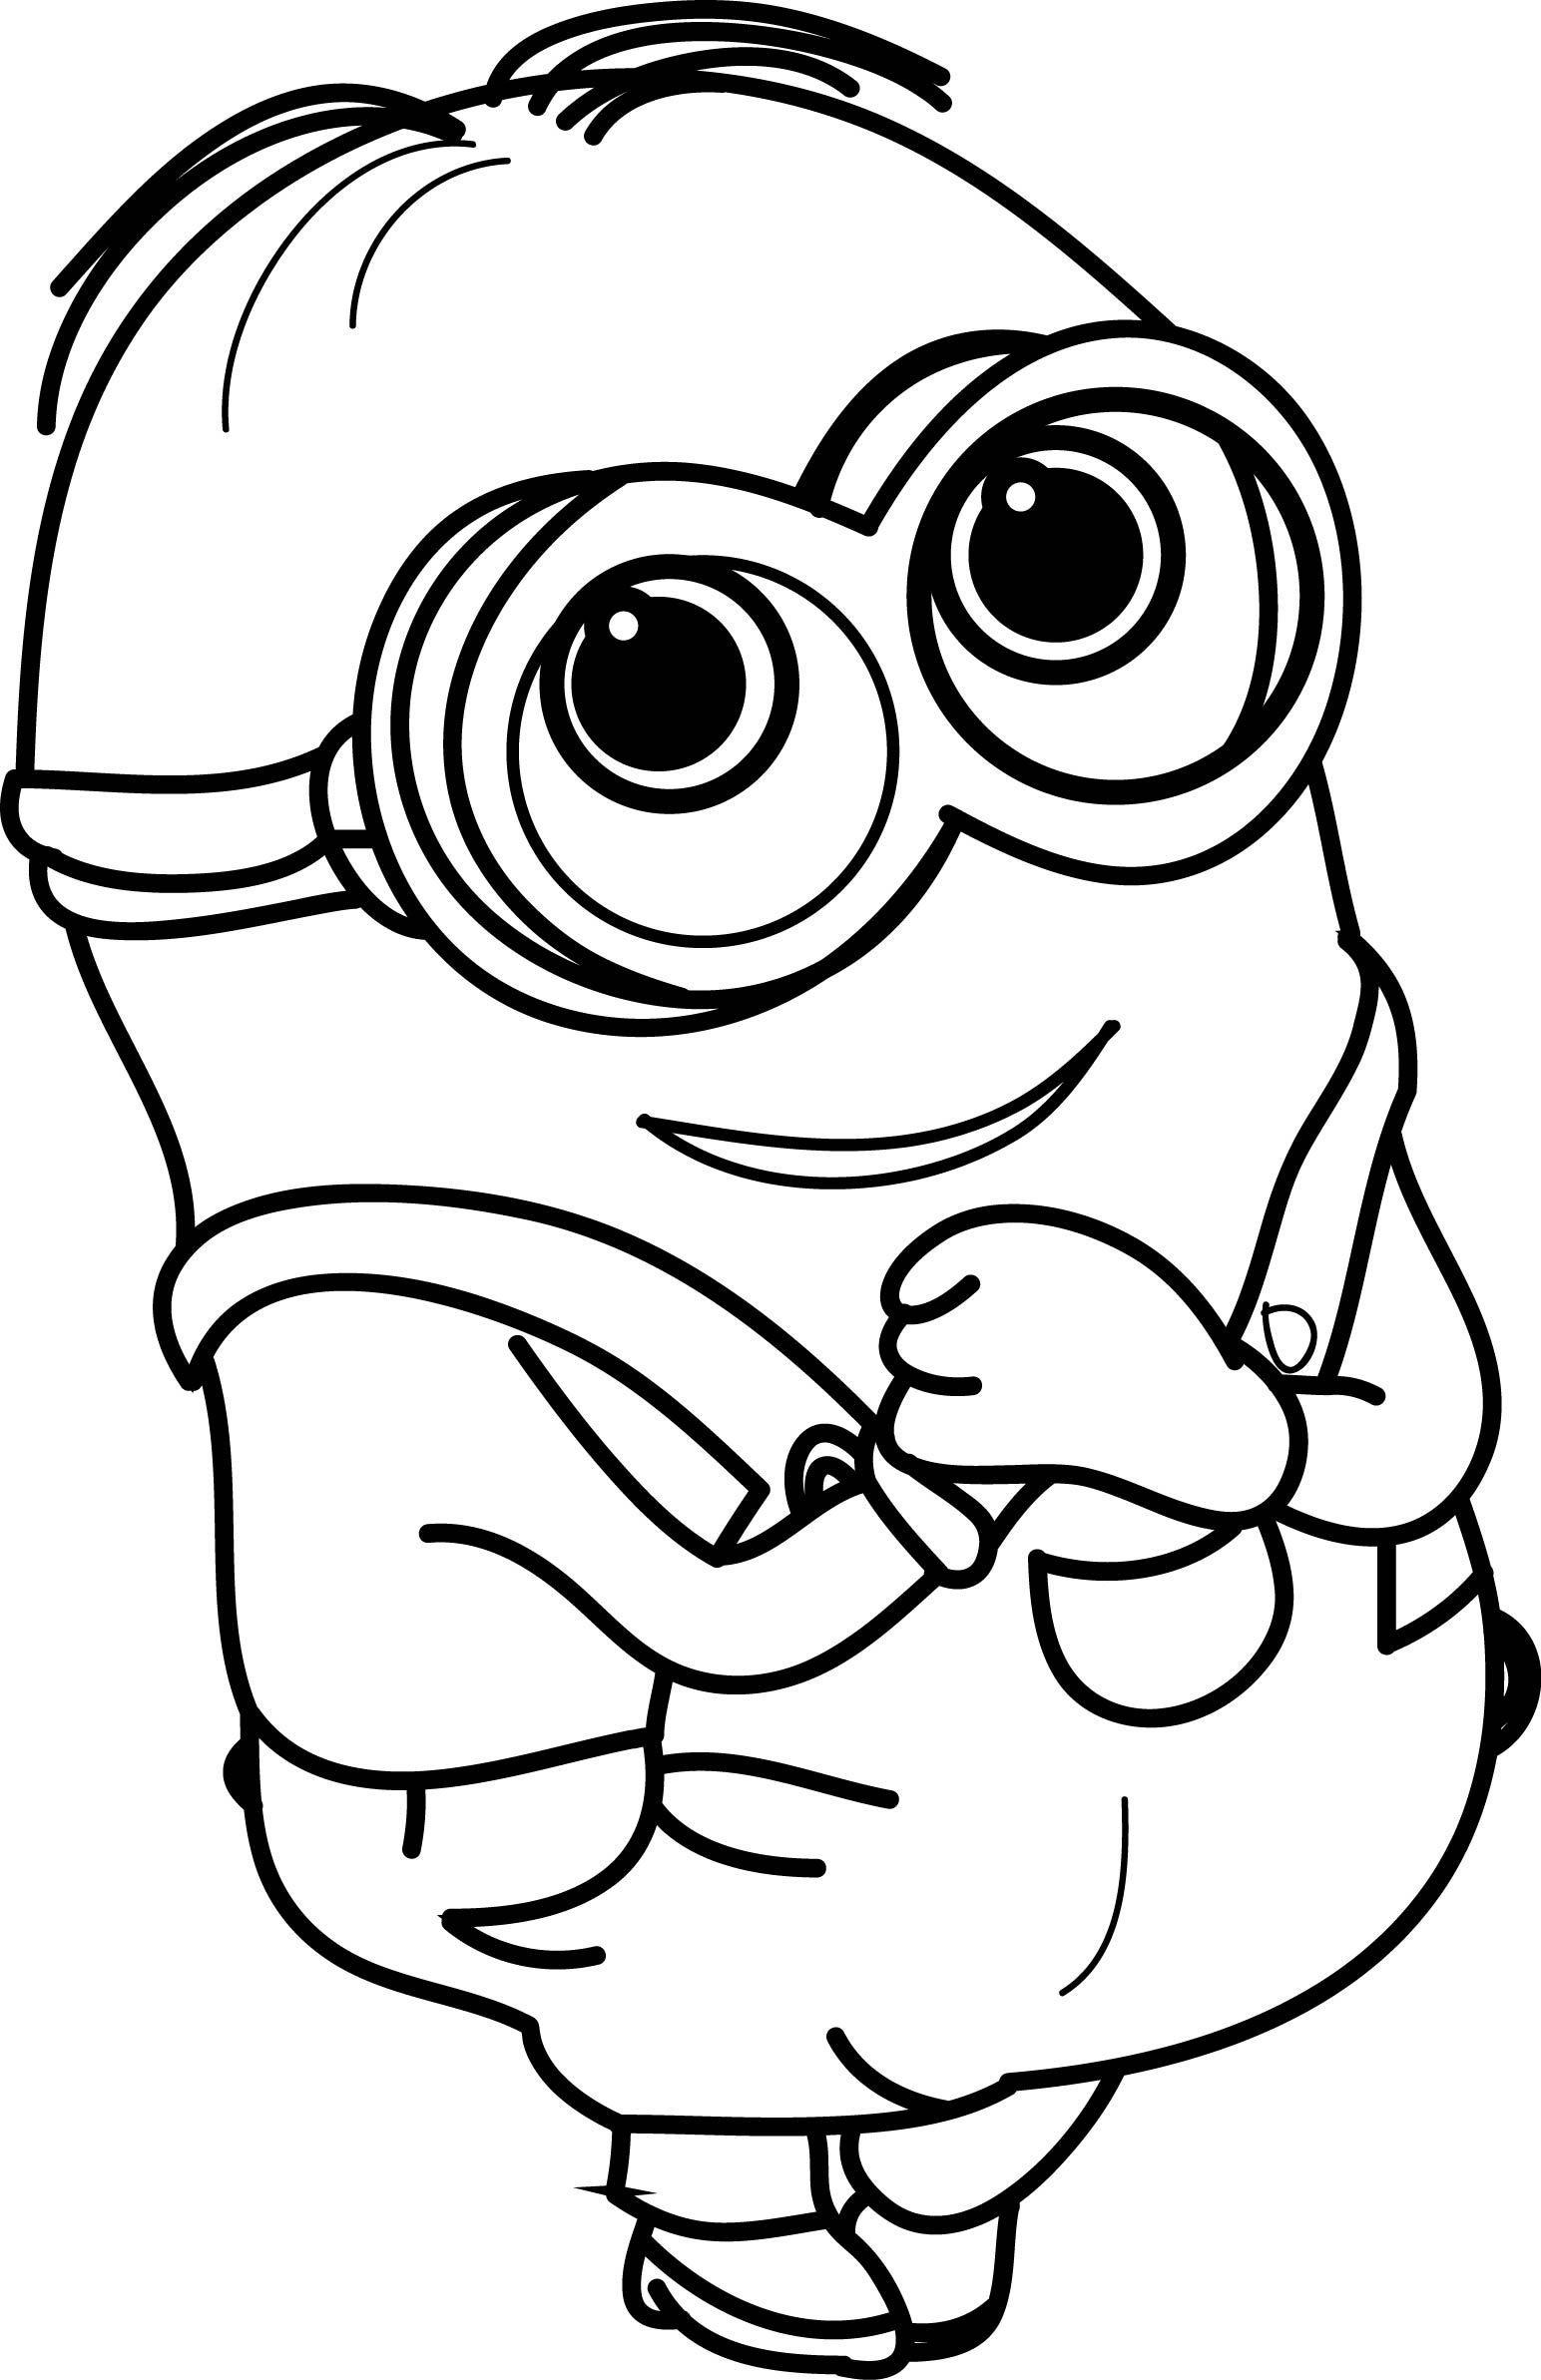 Printable Cute Coloring Pages For Boys
 Minion Very Cute Coloring Page Minions